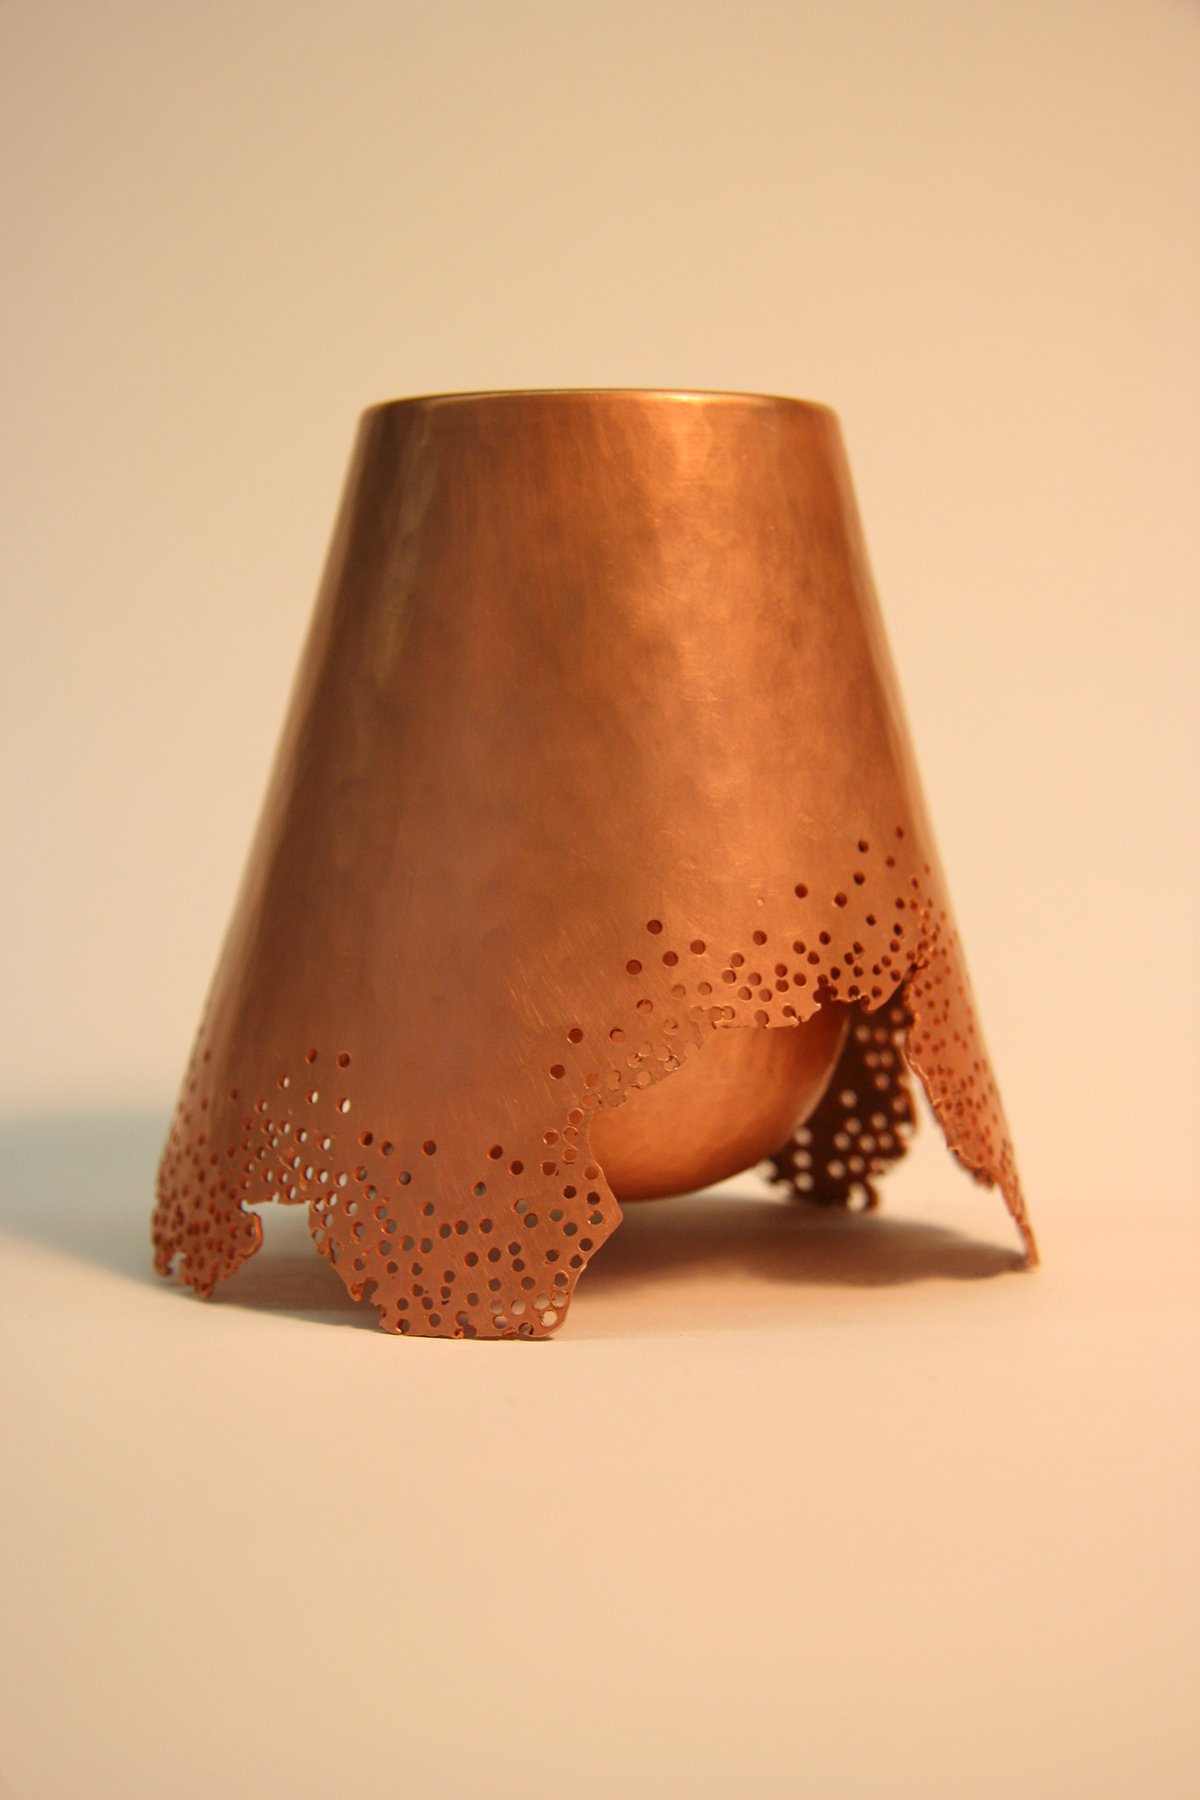 metalsmithing jewelry and metalsmithing risd forged forging copper sculpture vessel RISD J&M